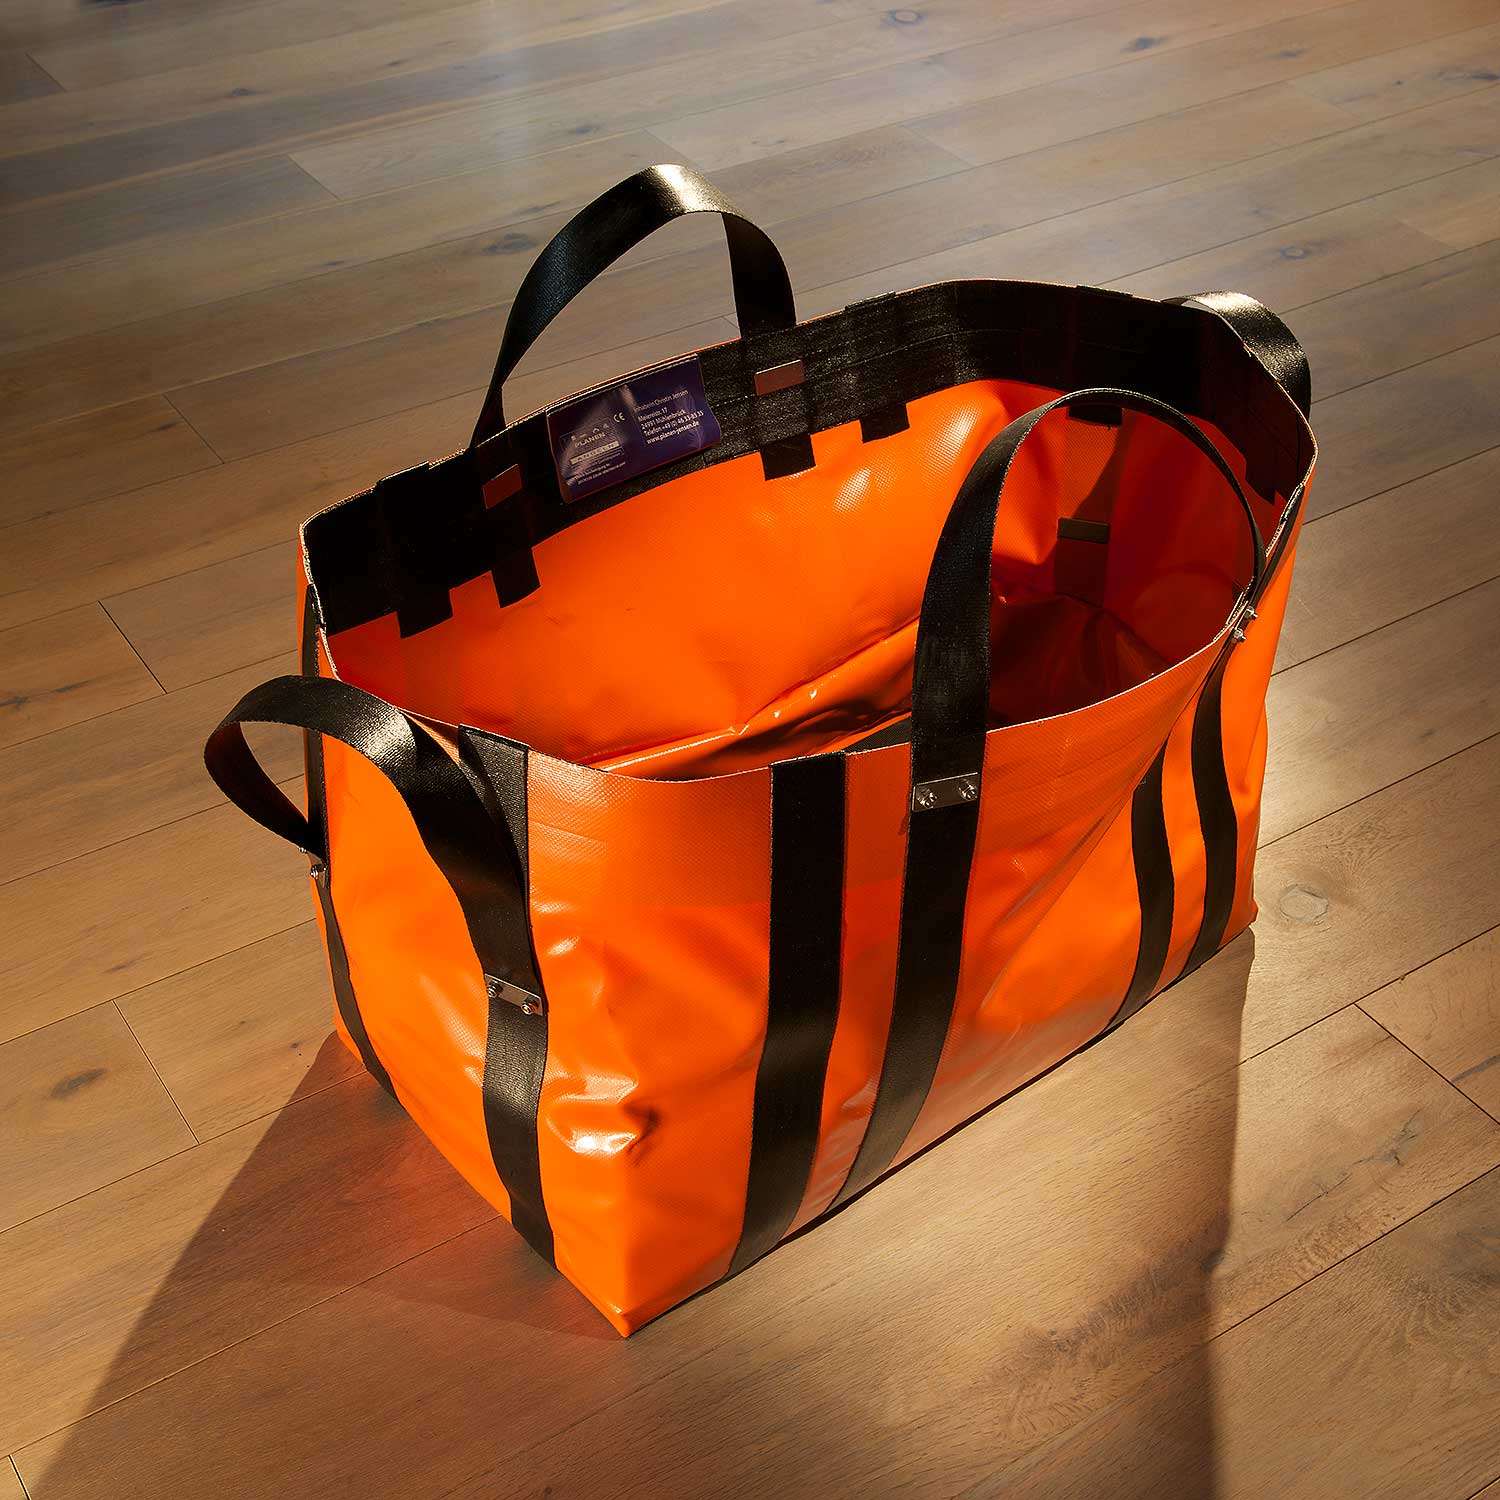 Angular heavy load bag made of technical textiles